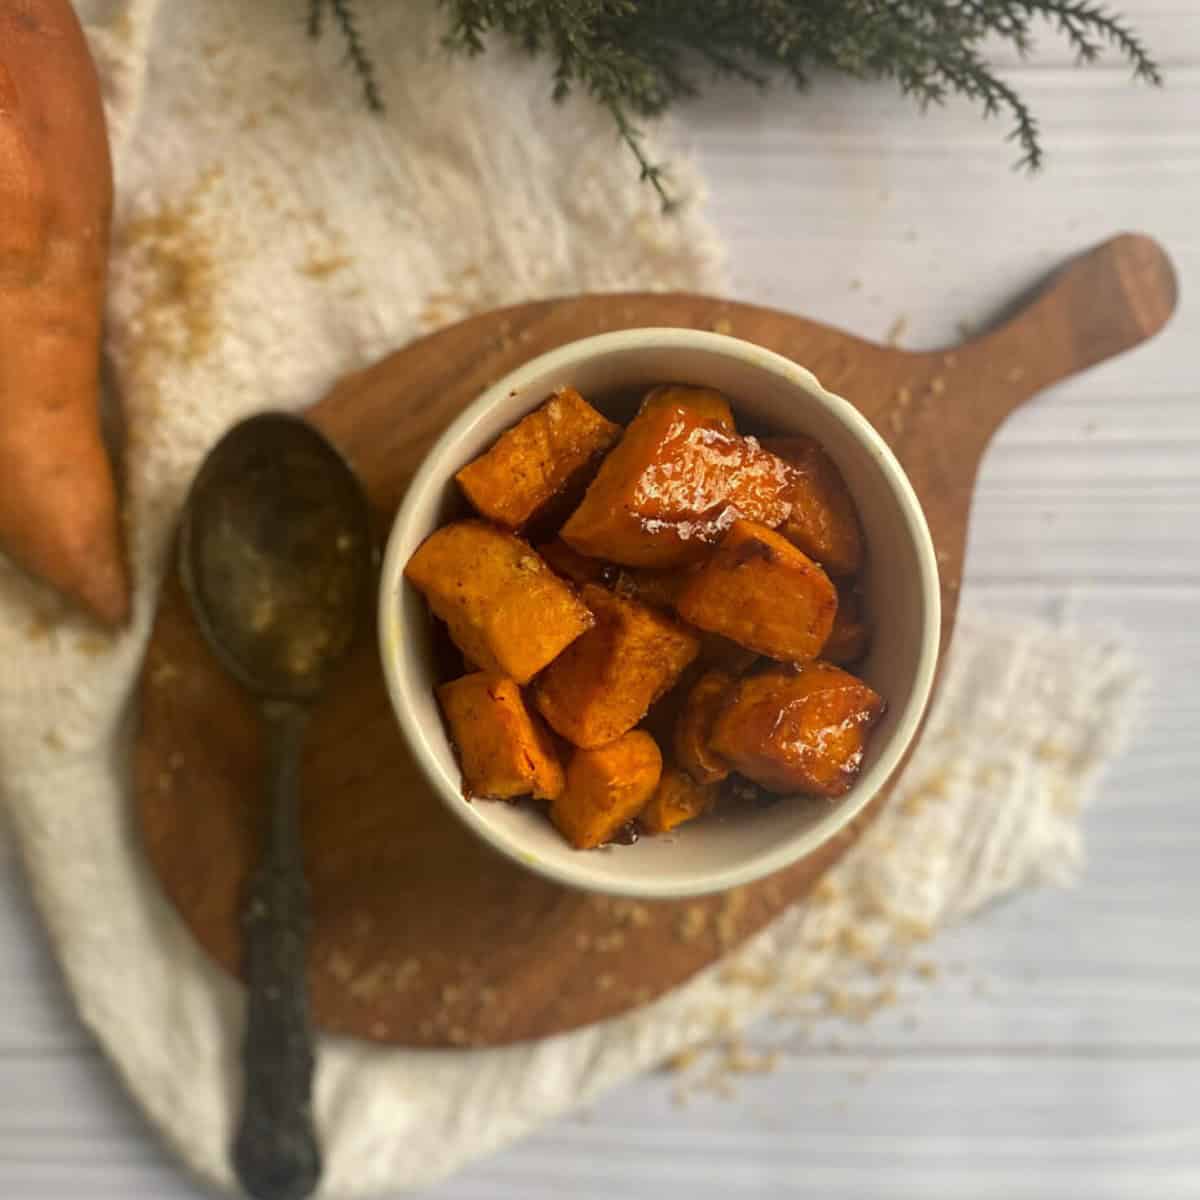 A rectangular white serving platter filled with roasted sliced sweet potatoes. The sweet potato slices are a golden brown color and have crispy edges. Some slices have a sprinkle of a brown sugary substance on top.